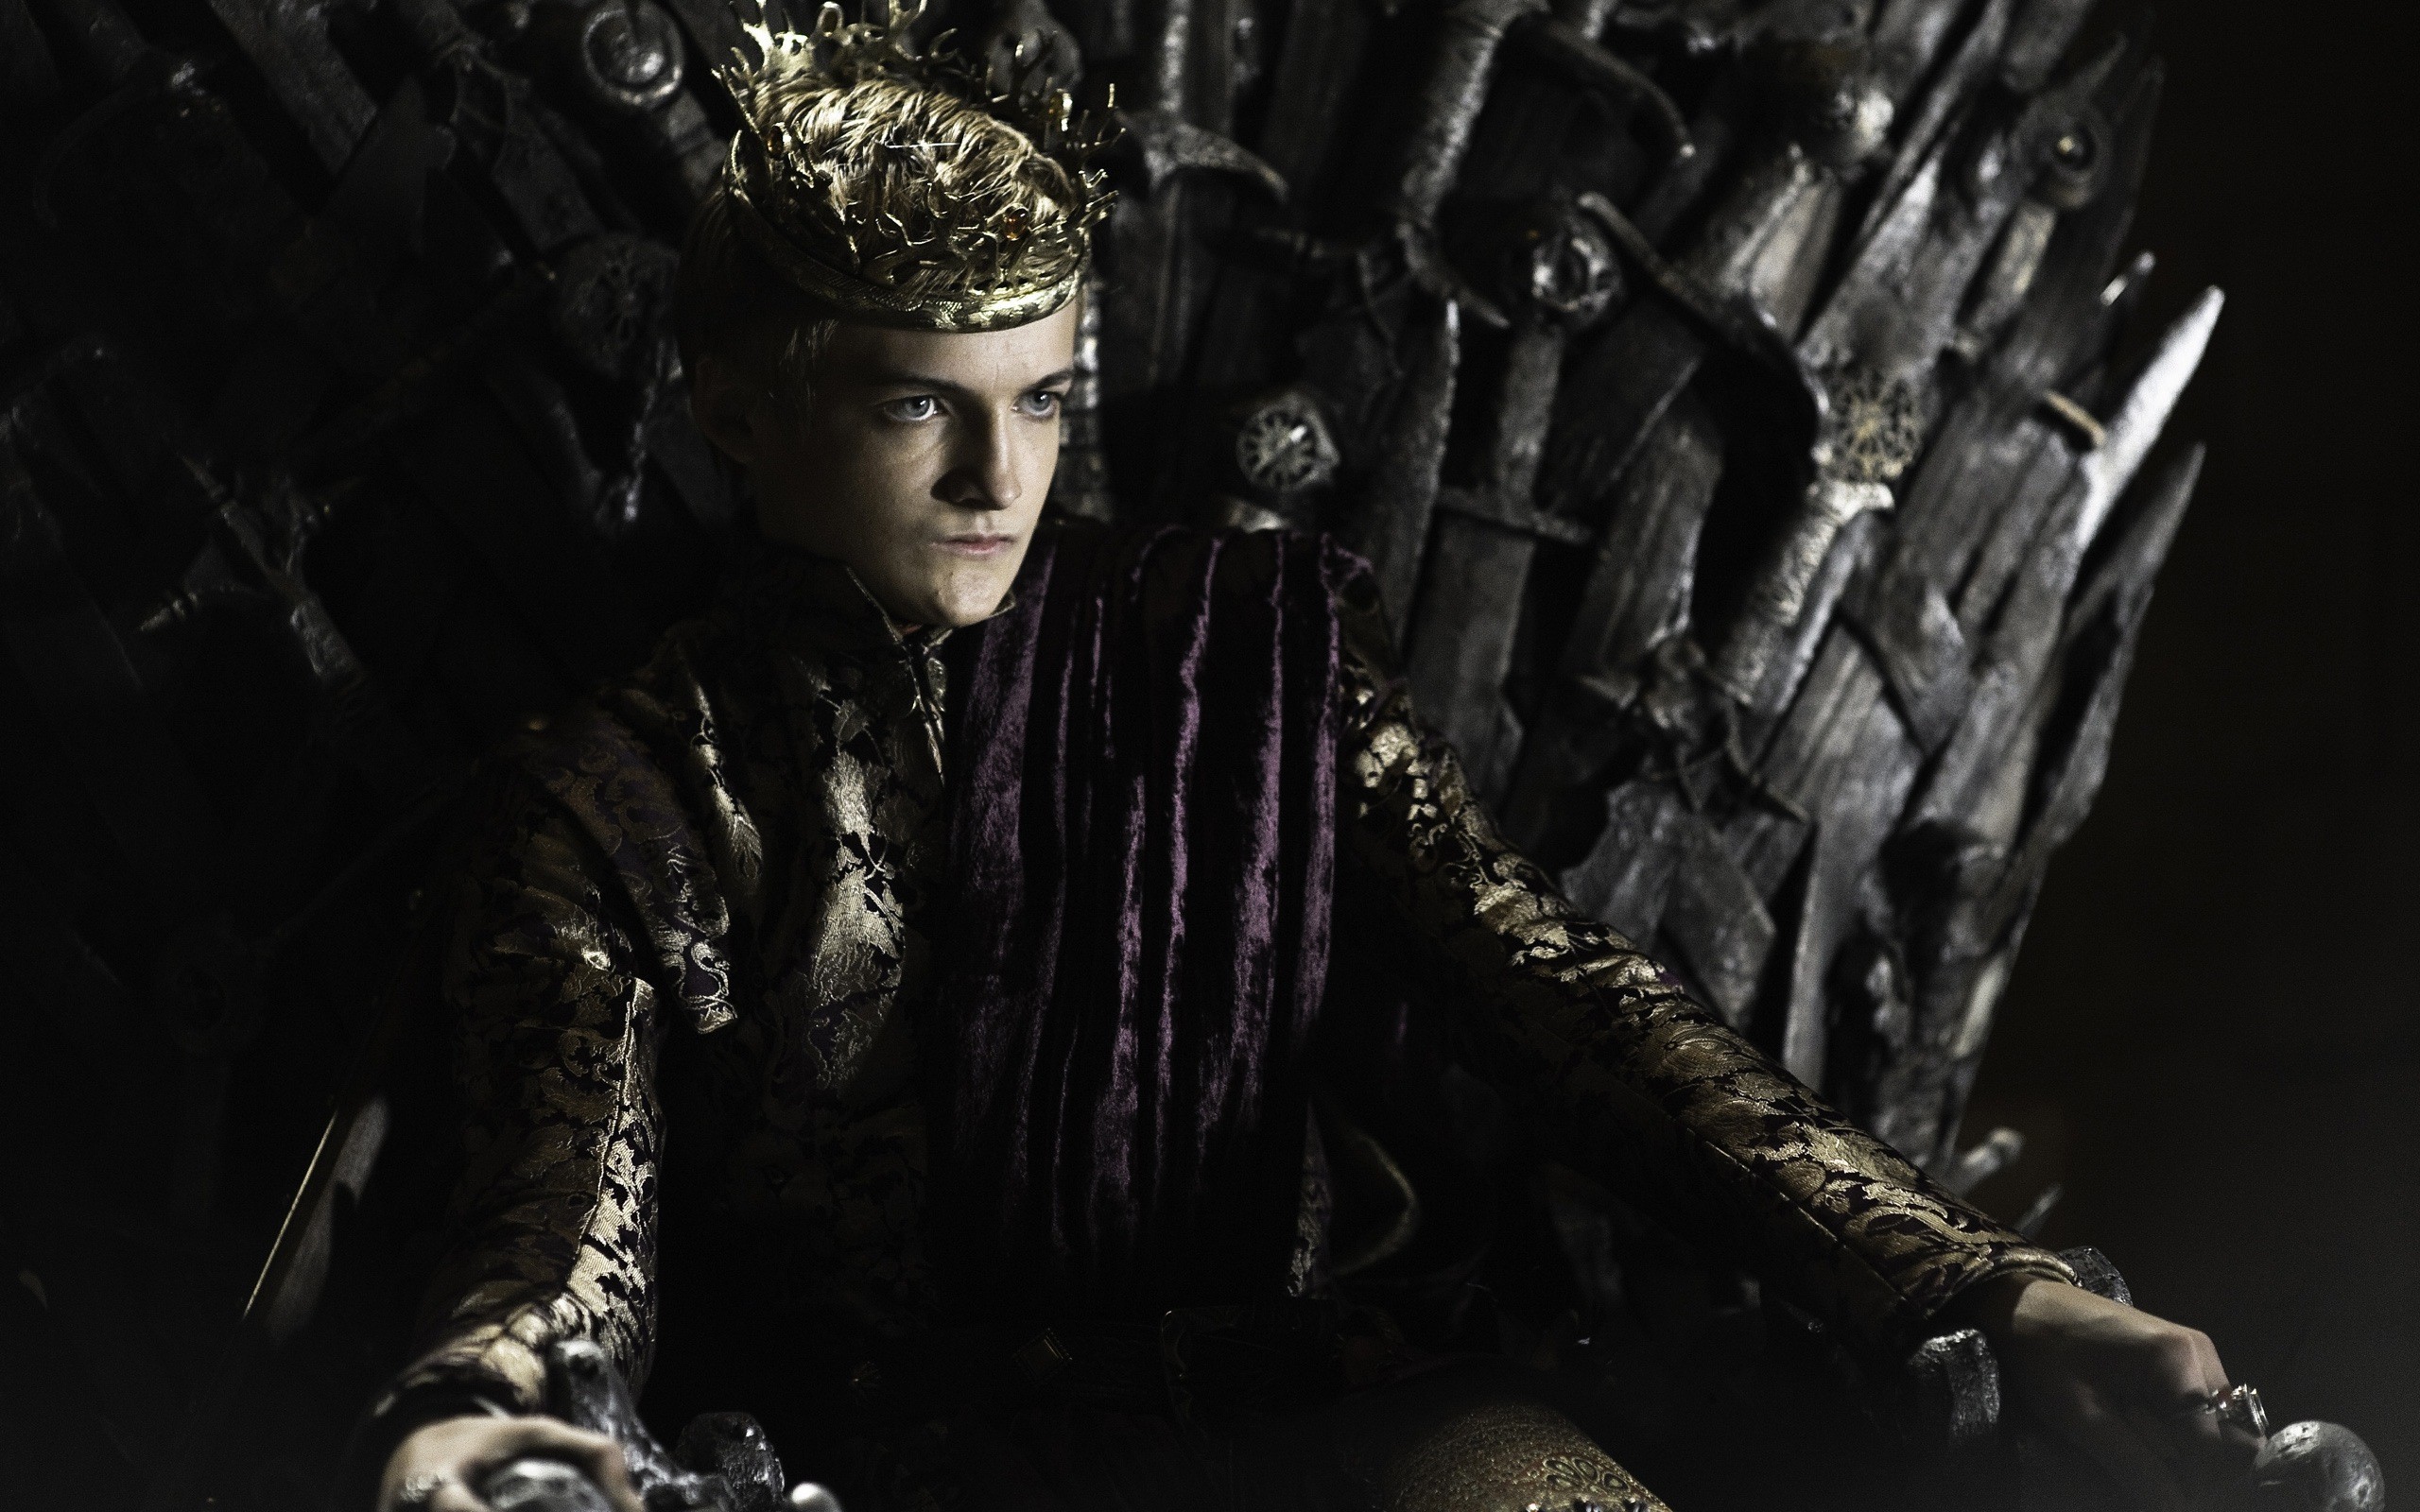 2560x1600  A Song of Ice and Fire: Game of Thrones HD Wallpaper #29 -